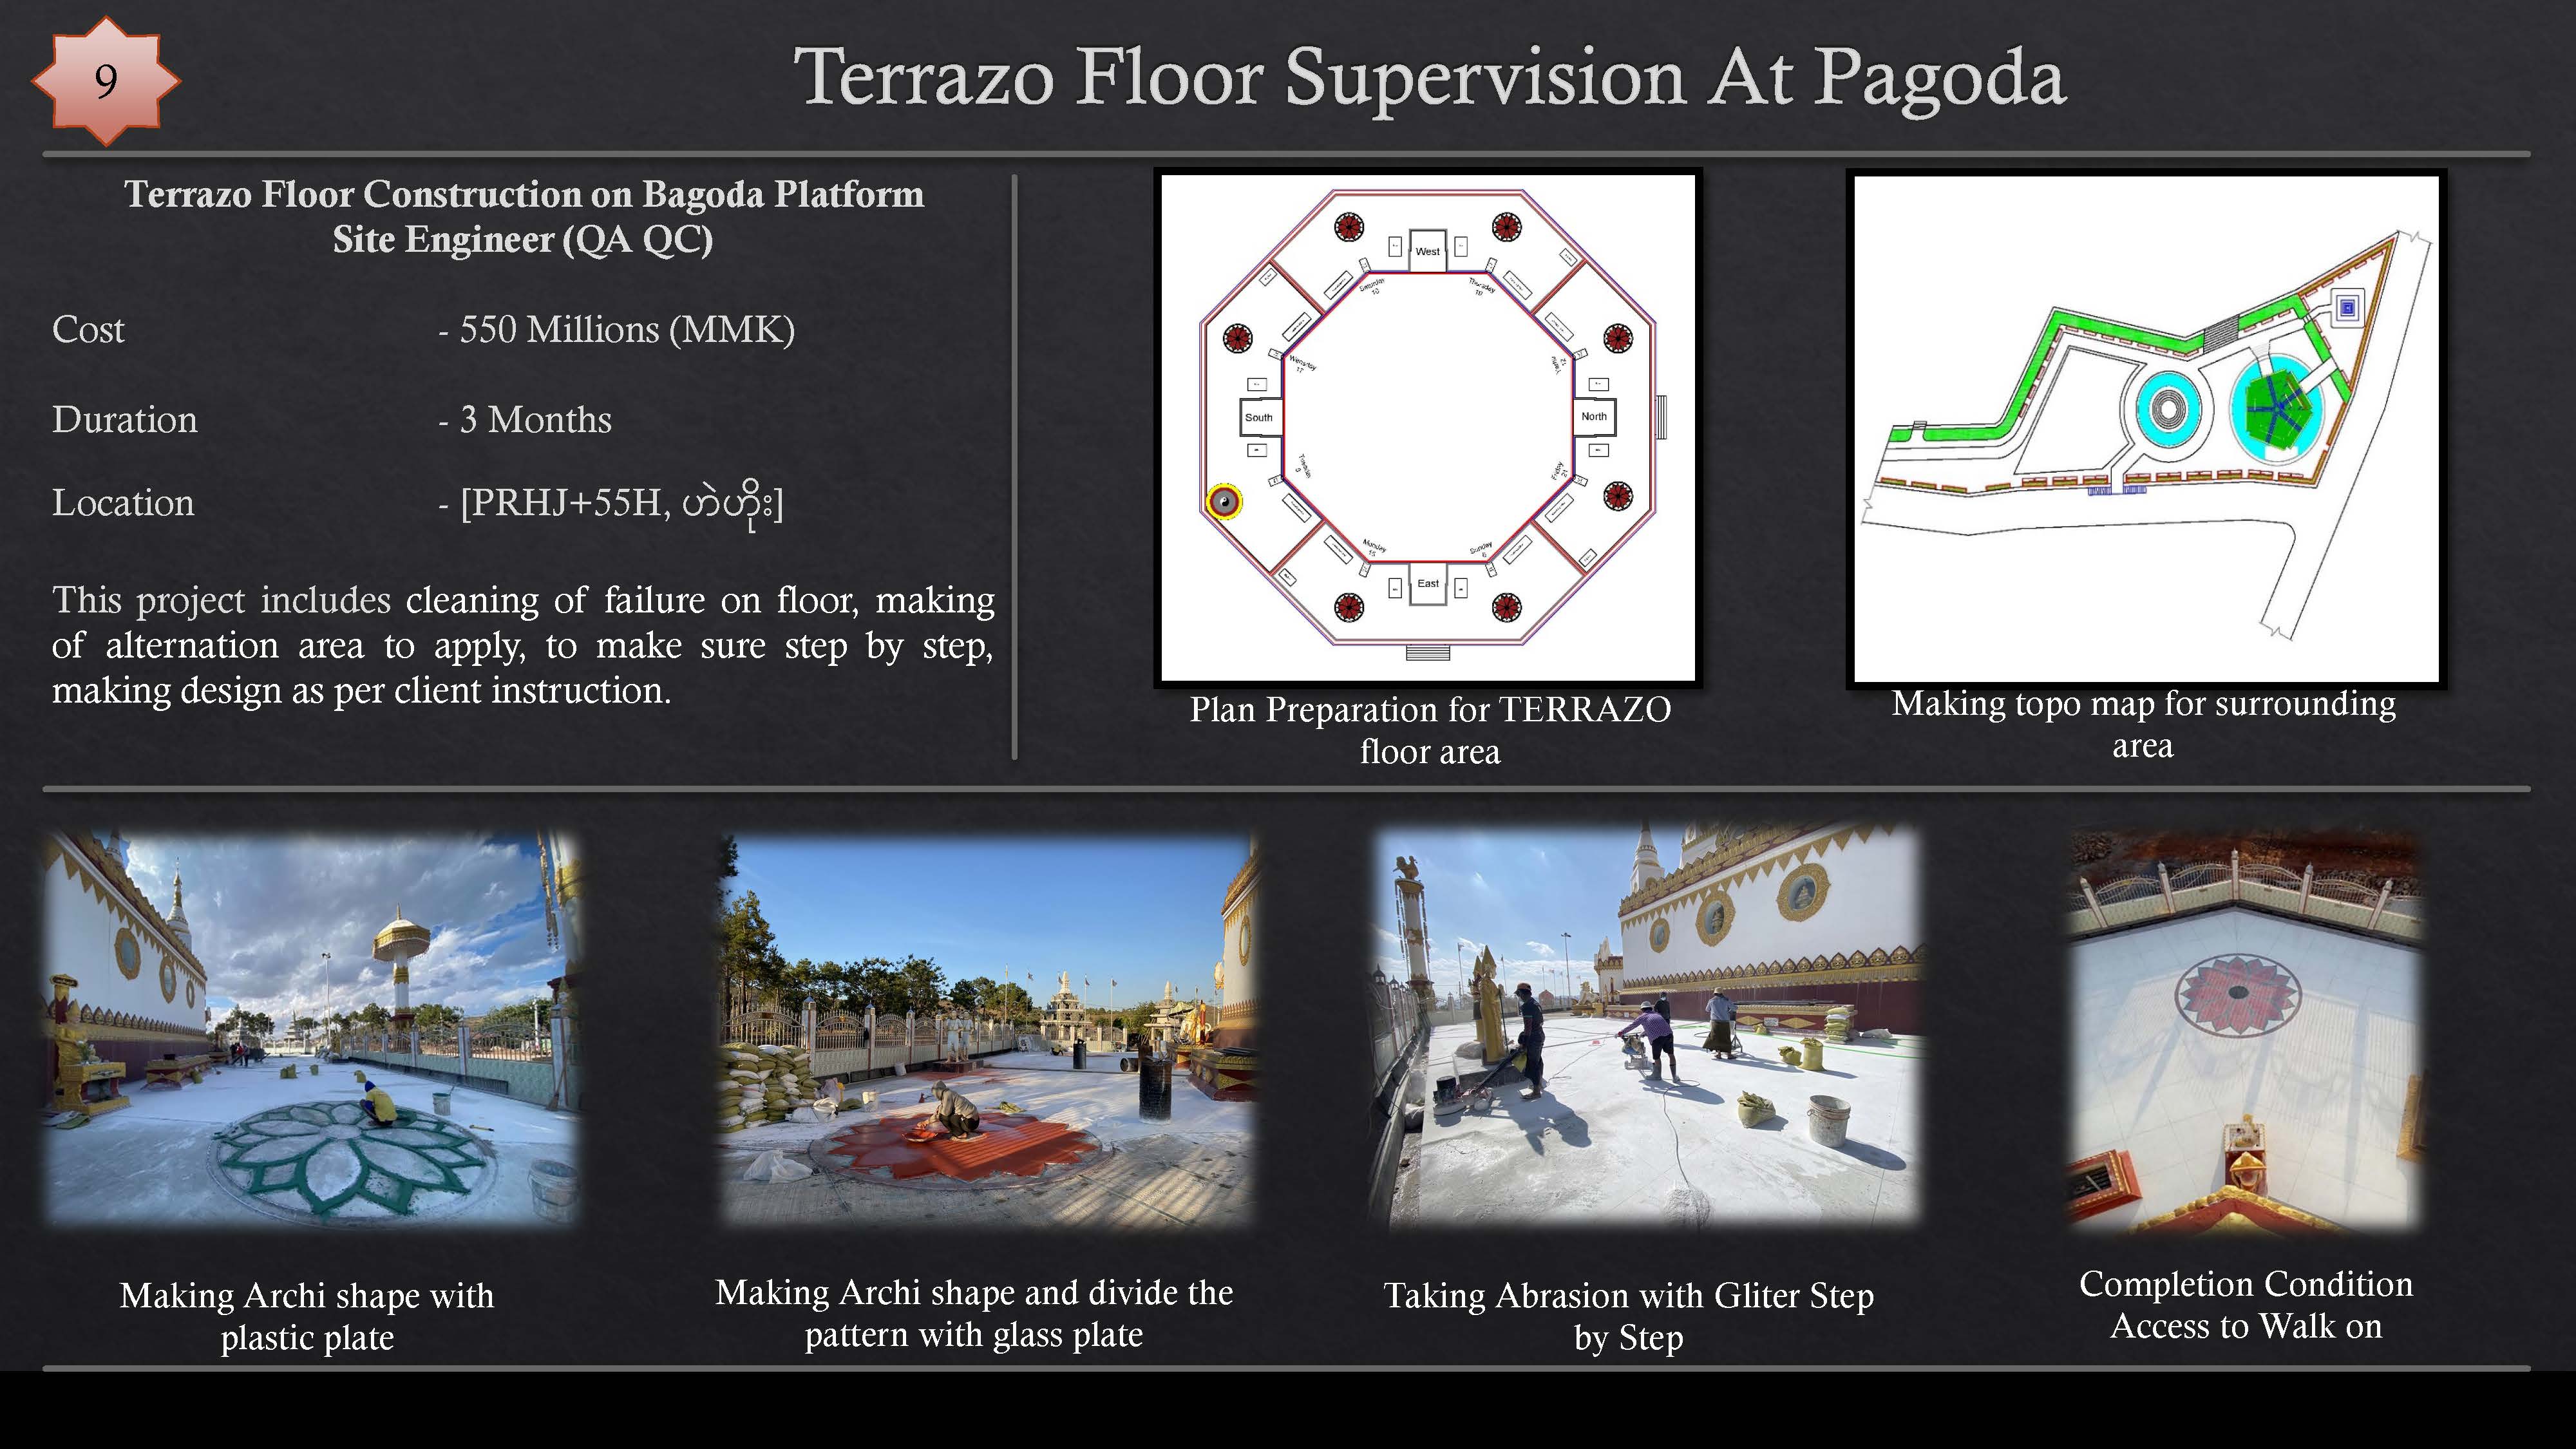 Terrazo Floor Supervision At Pagoda

Terrazo Floor Construction on Bagoda Platform

Site Engineer (QA QC)
Cost - 550 Millions (MMK)
Duration - 3 Months
Location - [PRHJ+55H, lH

This project includes cleaning of failure on floor, making
of alternation area to apply, to make sure step by step,
making design as per client instruction. rT

floor area LC

  

pao!

24 Re
IY =
7d 1

TH a E py ‘i
CAs 17

   

Making Archi shape with Making Archi shape and divide the Taking Abrasion with Gliter Step Completion Condition
plastic plate pattern with glass plate SAS Access to Walk on